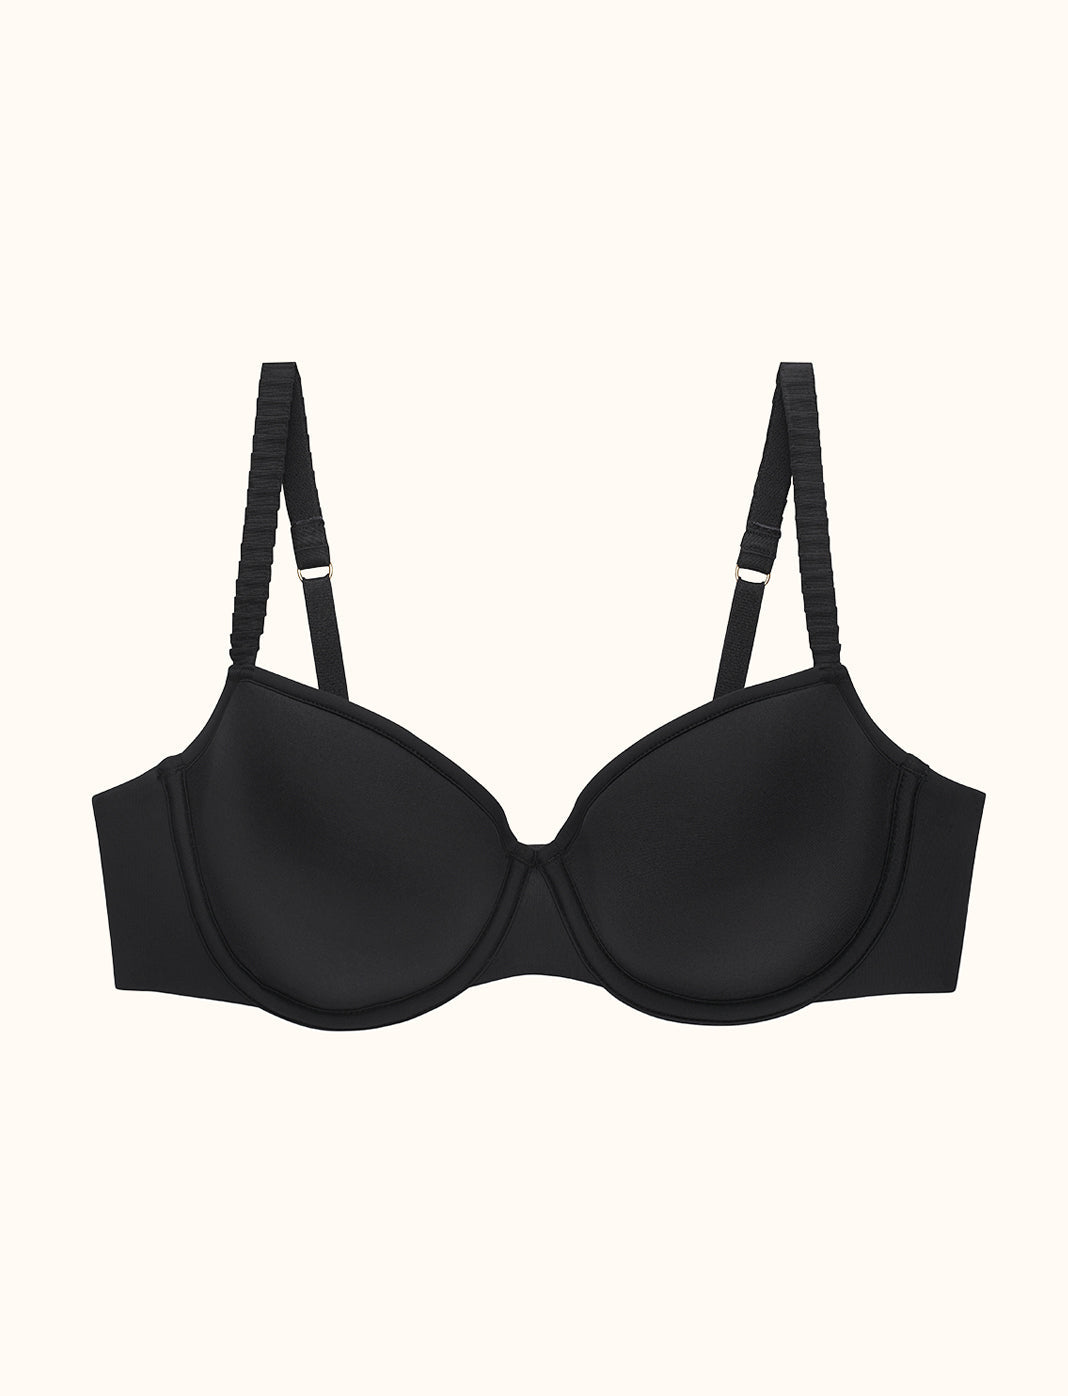 Our 5 Best-Selling Bras of All Time - ThirdLove